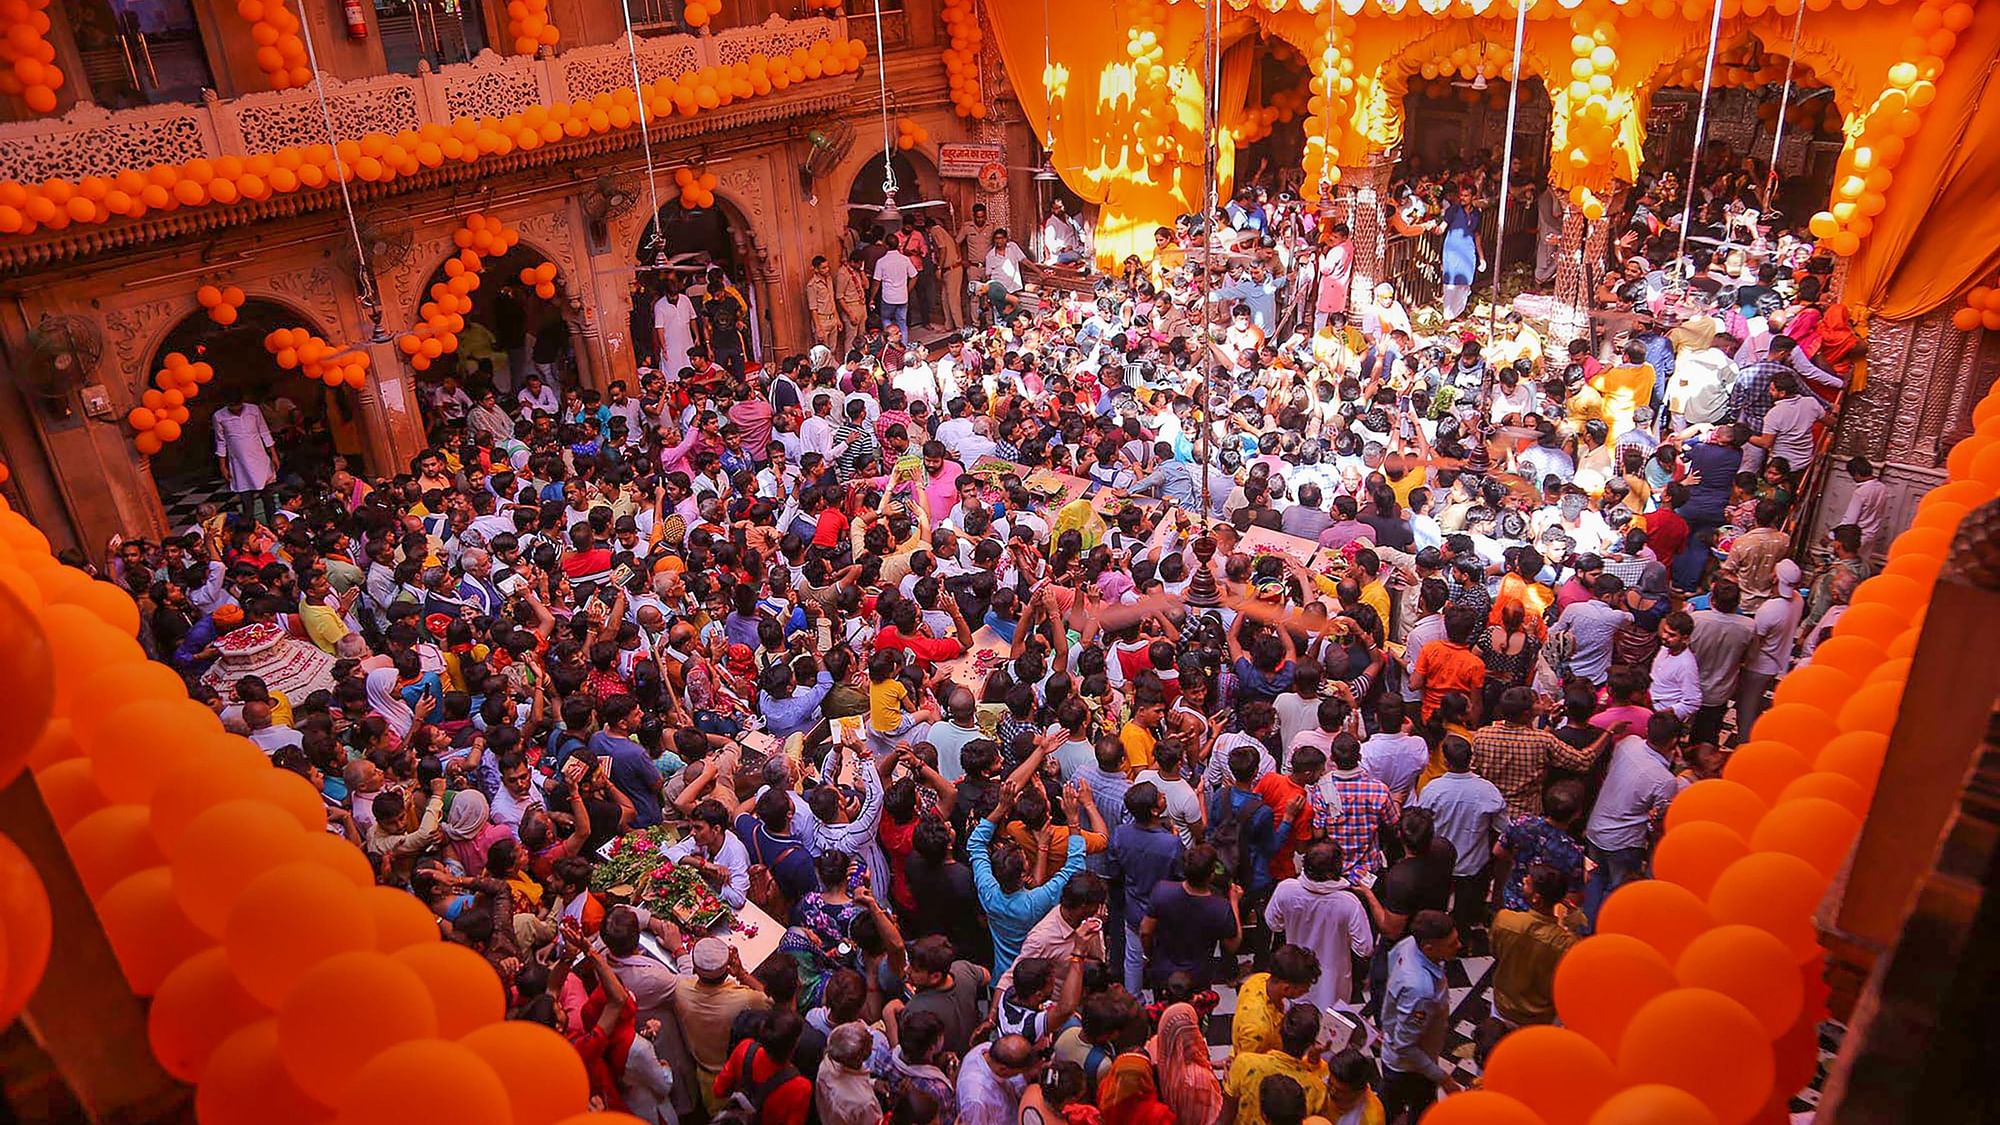 <div class="paragraphs"><p>Devotees arrive to pay obesiance to Lord Bankey Bihari on the occasion of Janmashtami, at the Shri Bankey Bihari temple, in Vrindavan, Friday, 19 August, 2022.</p></div>